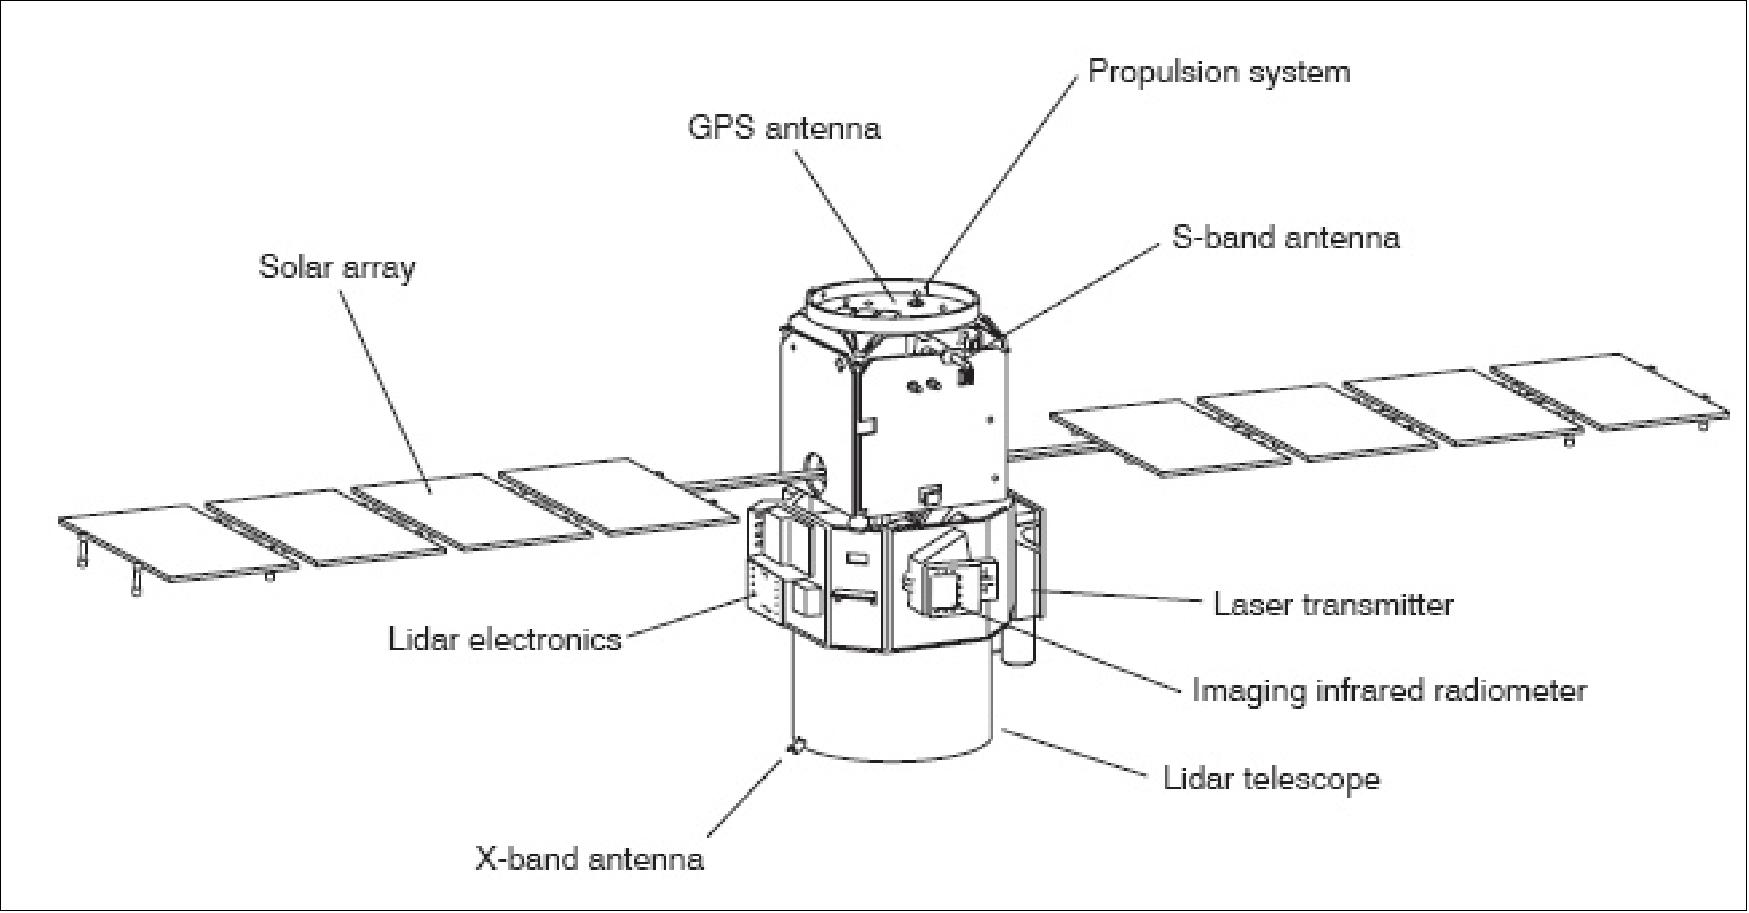 Figure 2: Line drawing of the CALIPSO spacecraft (image credit: NASA)